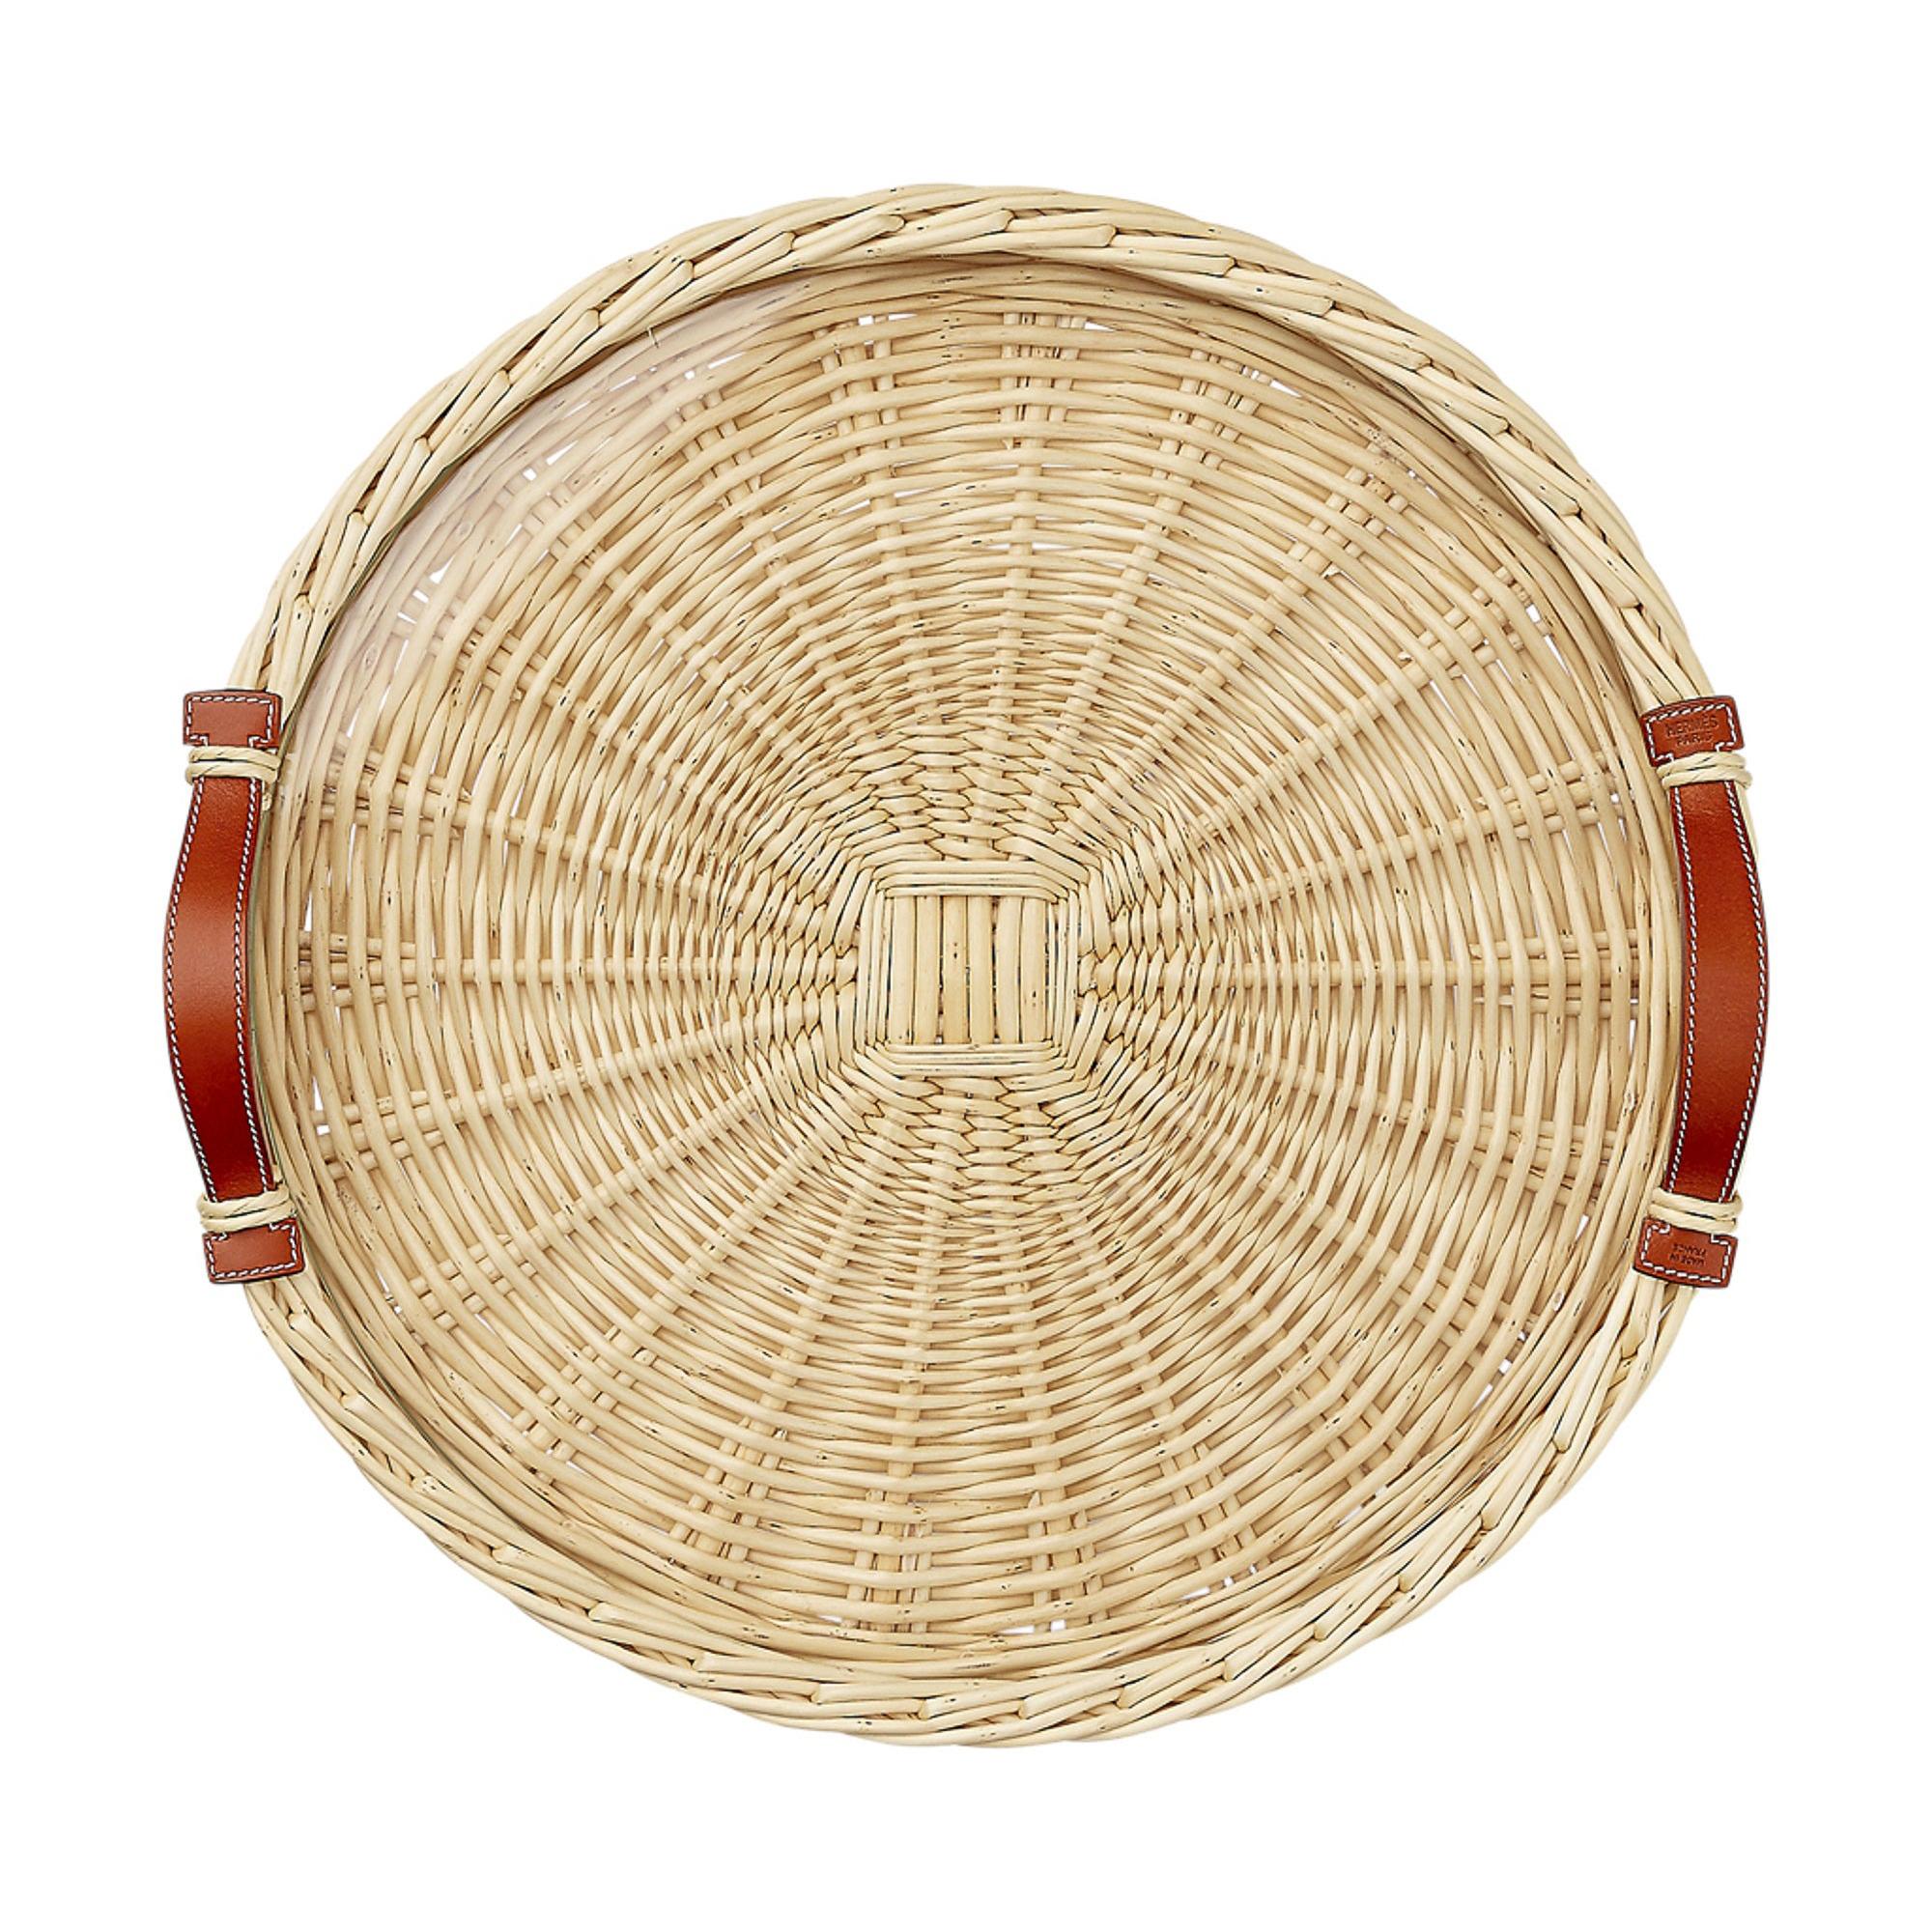 Hermes Tray Oseraie (Wicker) Round Large Model New w/Box